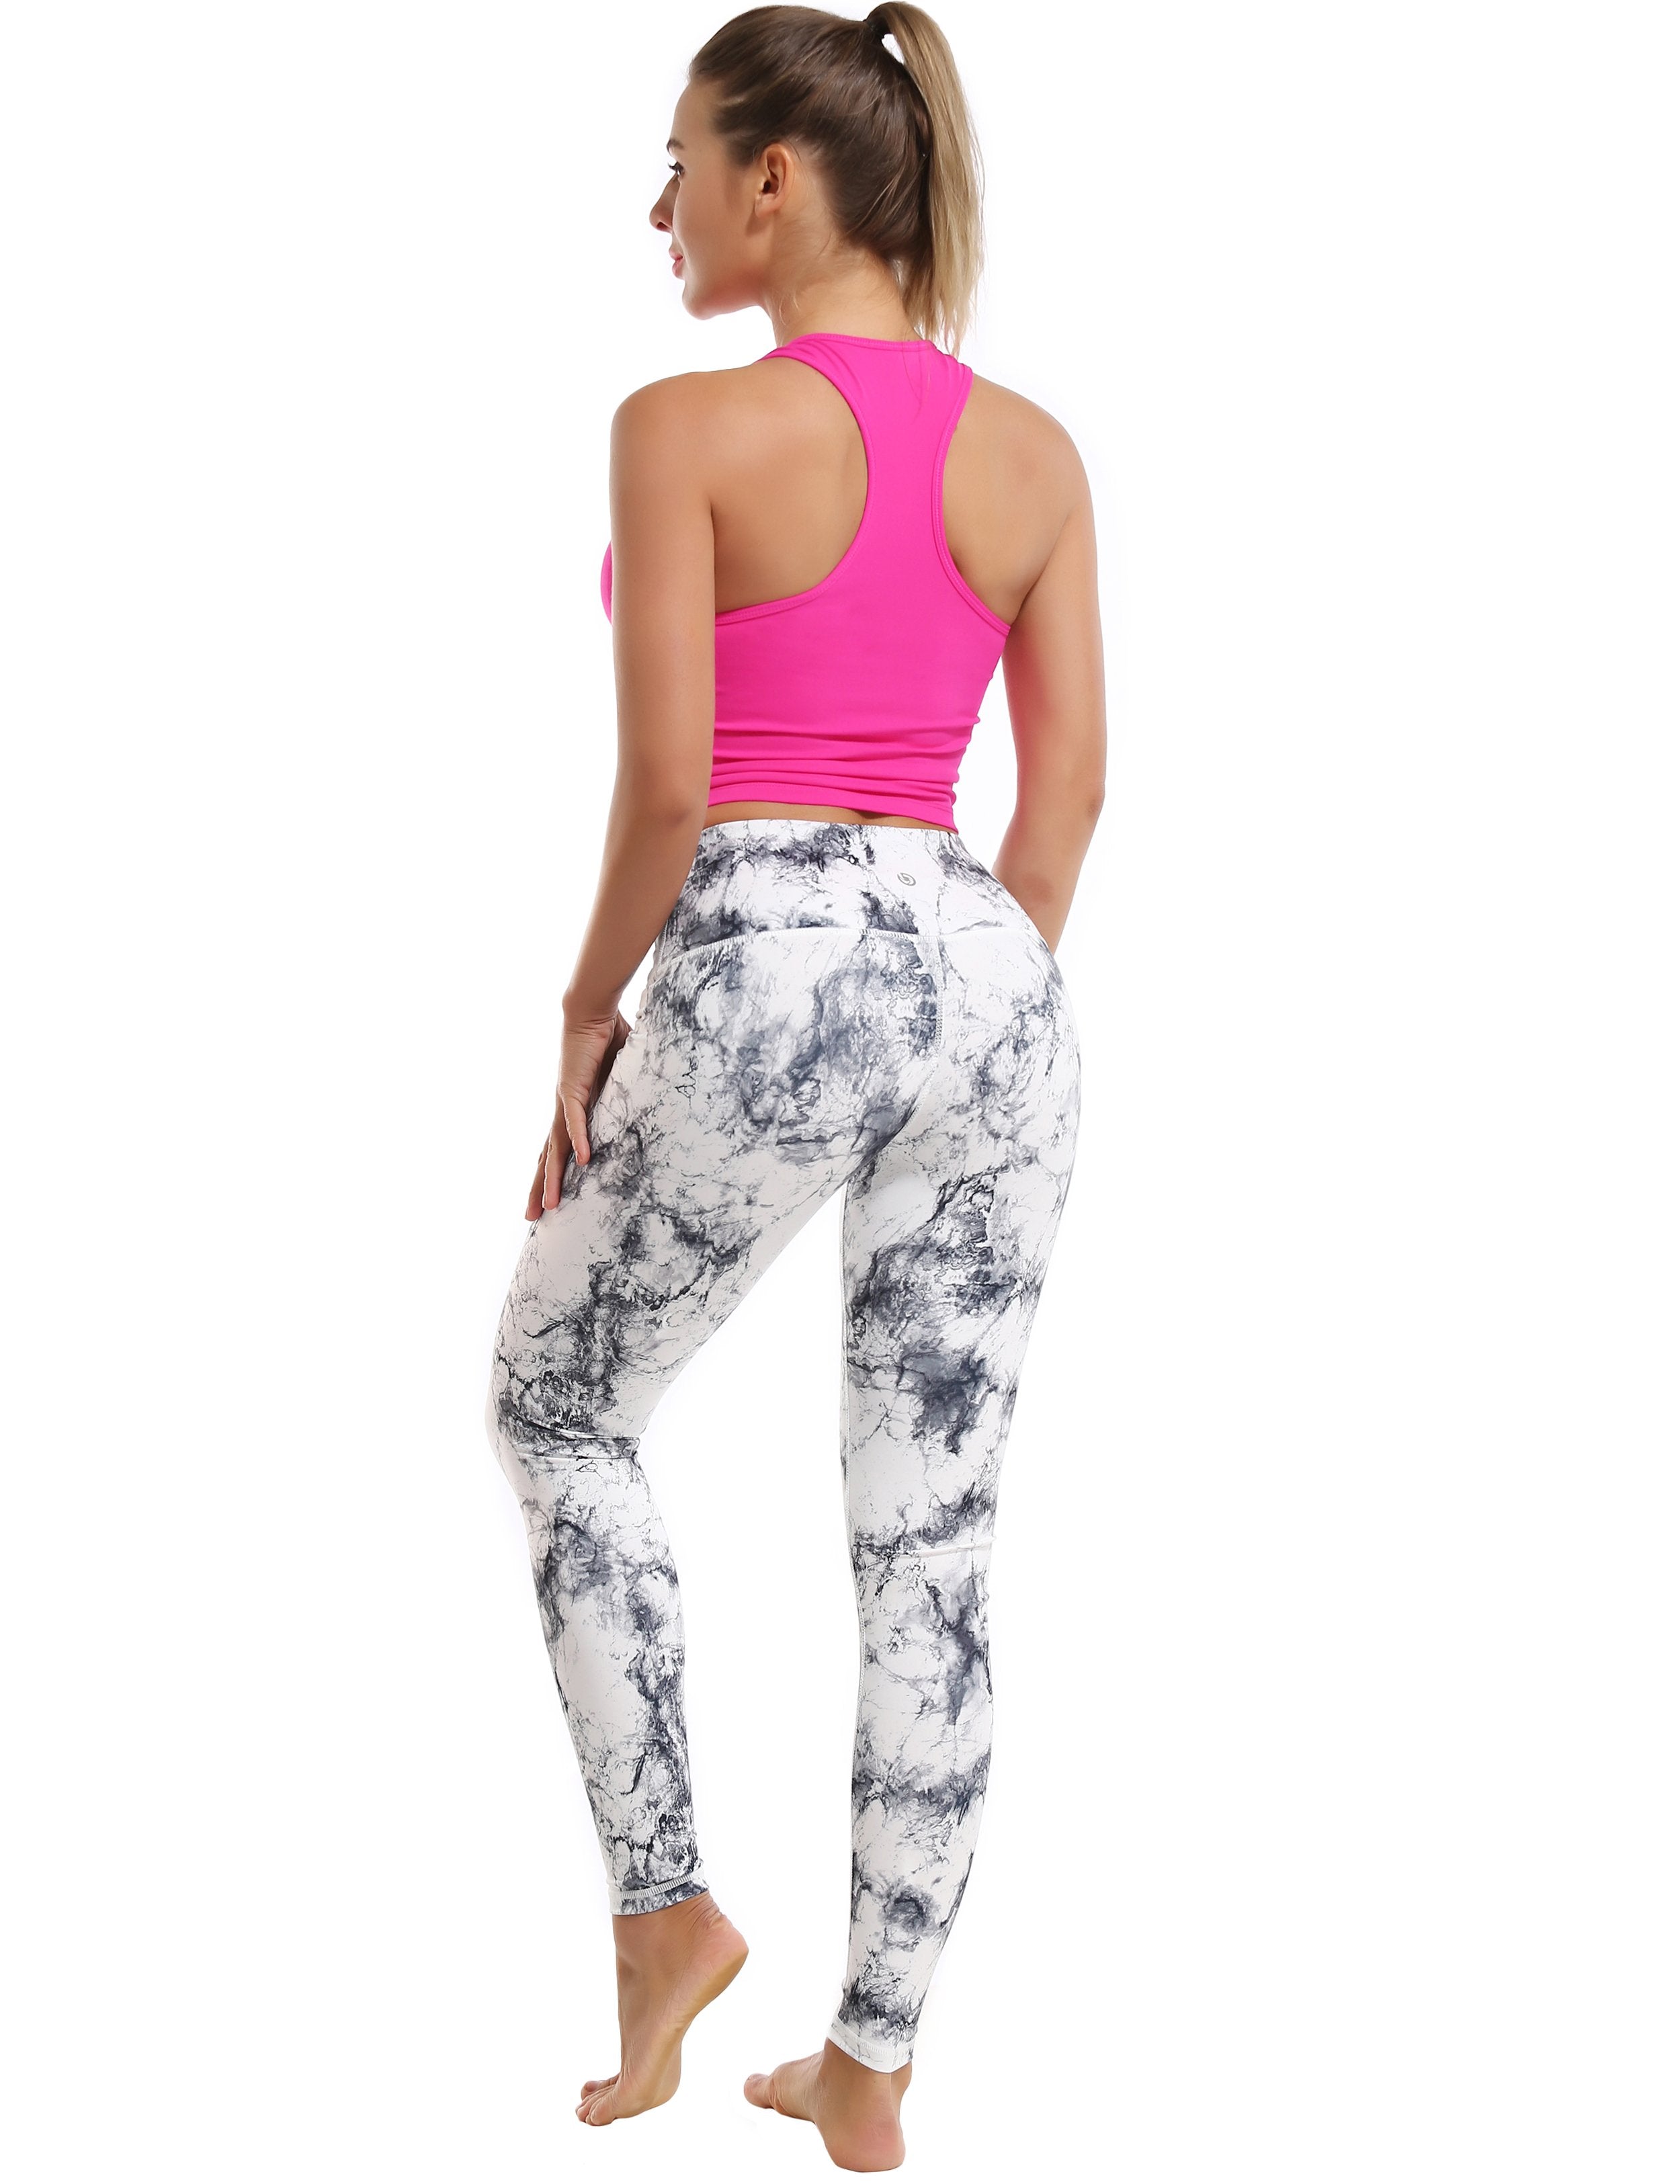 High Waist Biking Pants arabescato 82%Polyester/18%Spandex Fabric doesn't attract lint easily 4-way stretch No see-through Moisture-wicking Tummy control Inner pocket